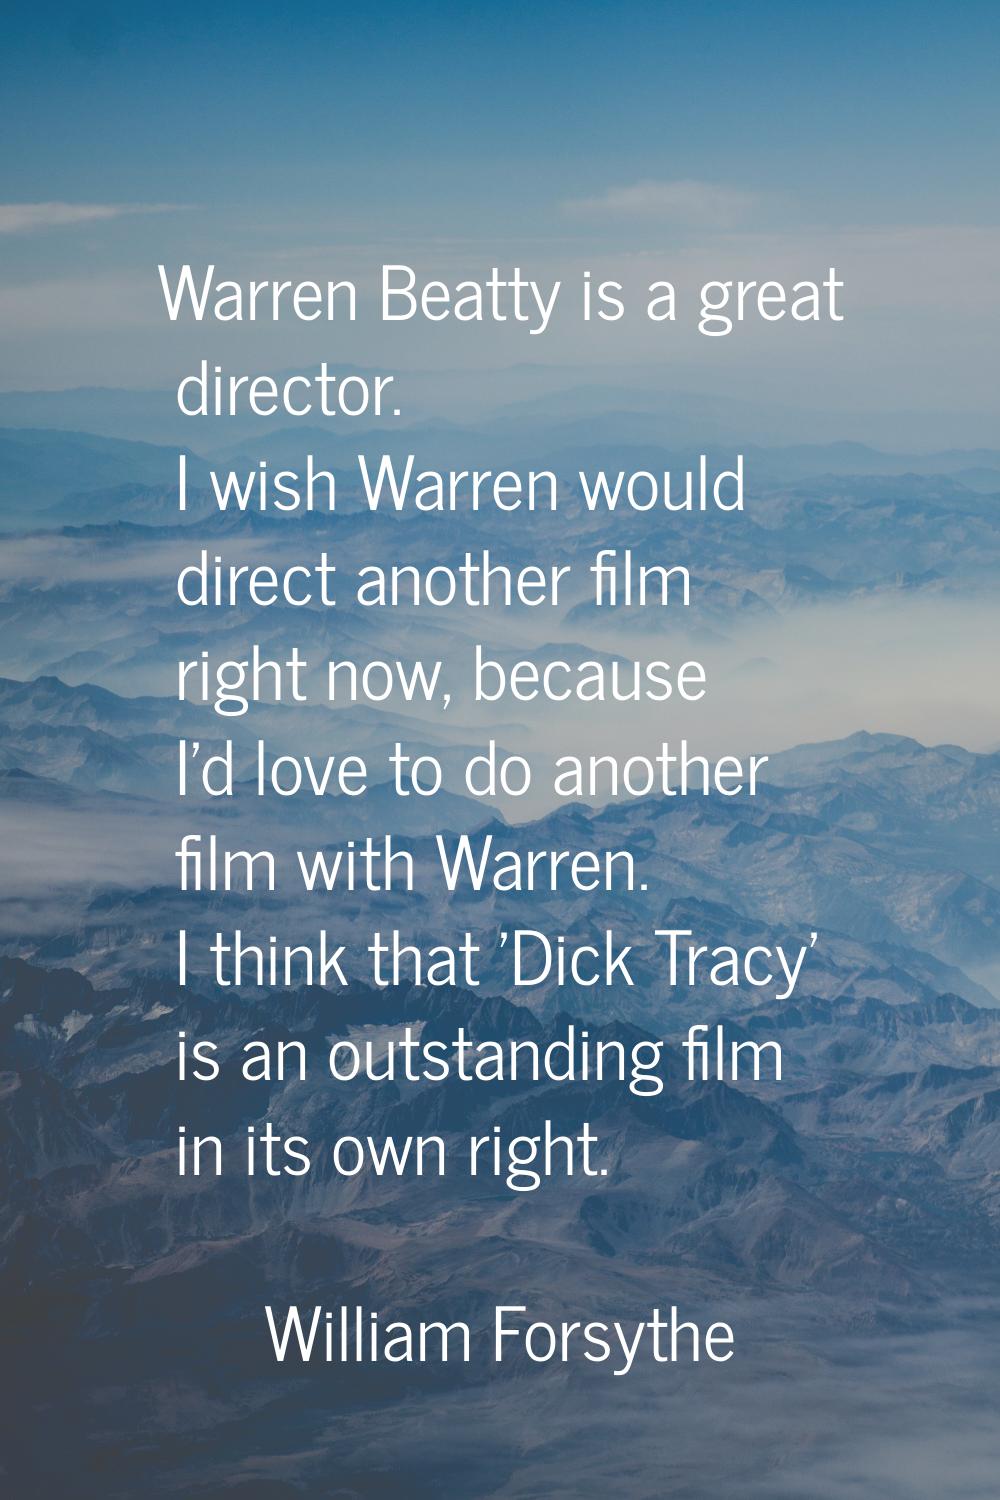 Warren Beatty is a great director. I wish Warren would direct another film right now, because I'd l